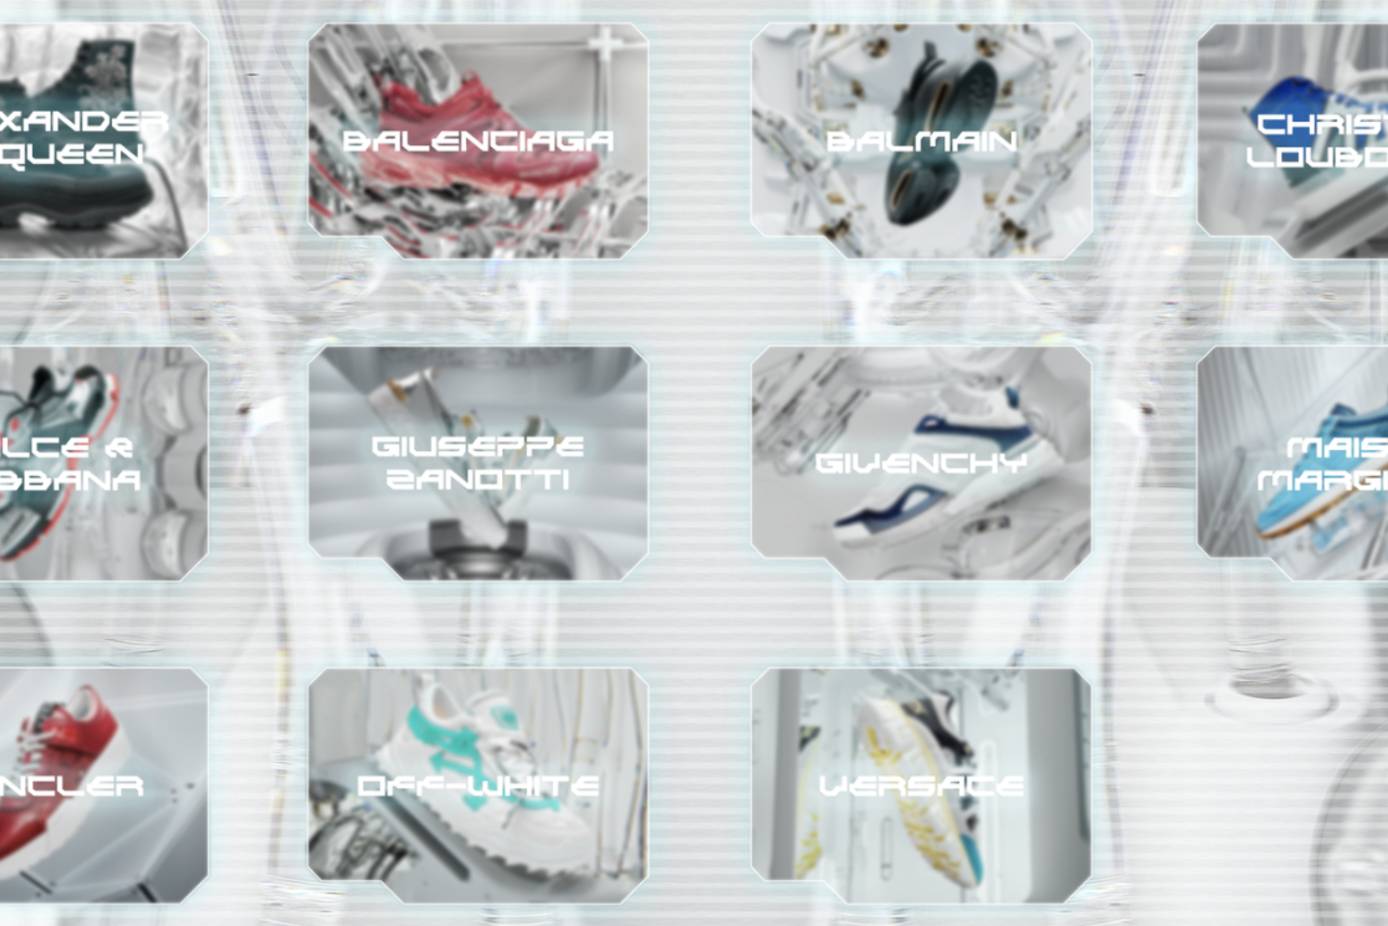 Neiman Marcus and Hypebeast Launch Exclusive Sneaker Collection